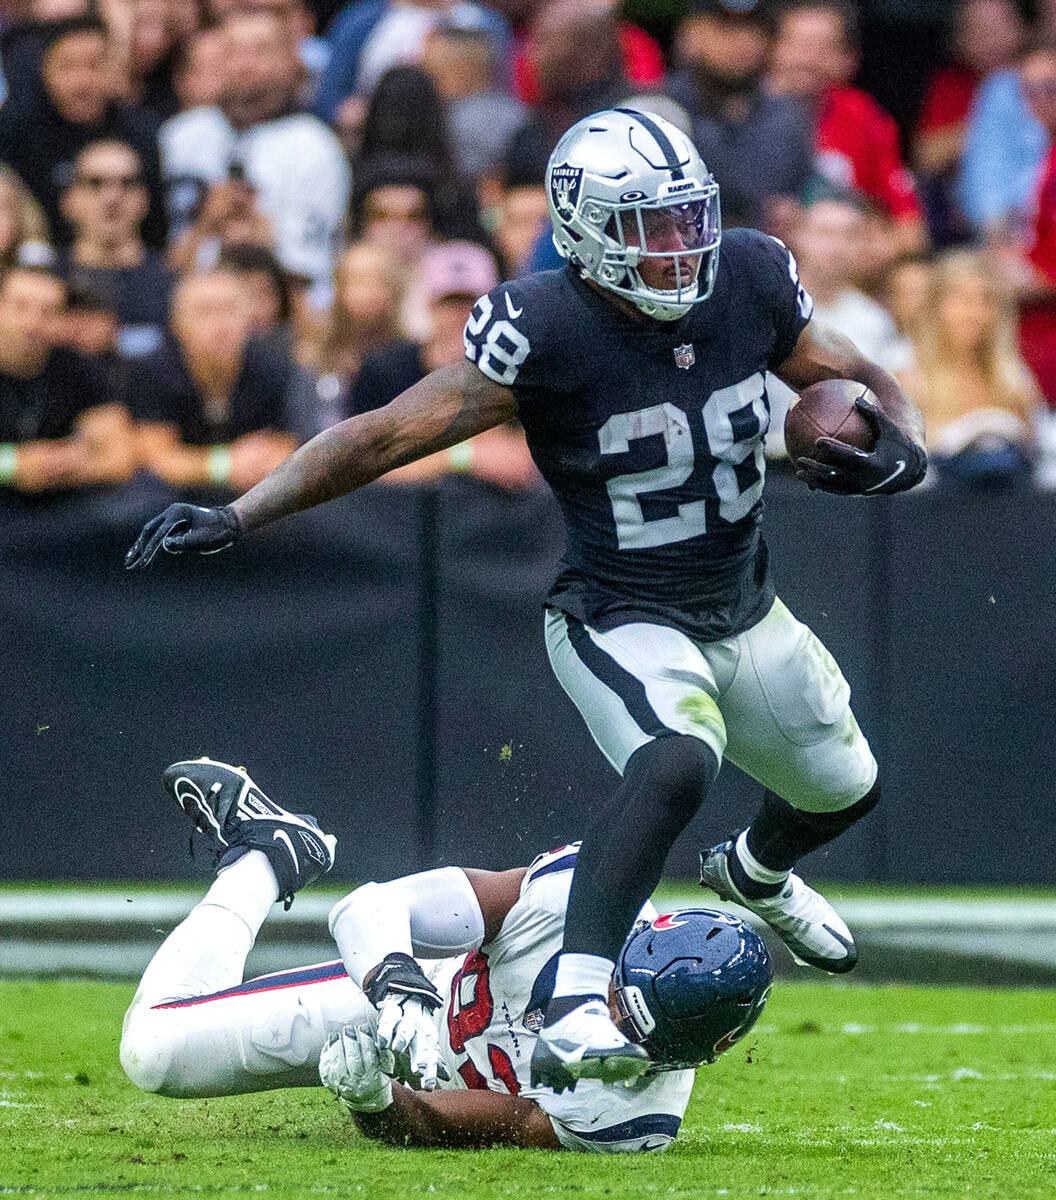 Oakland Raiders' drive of the game in loss vs. Texans